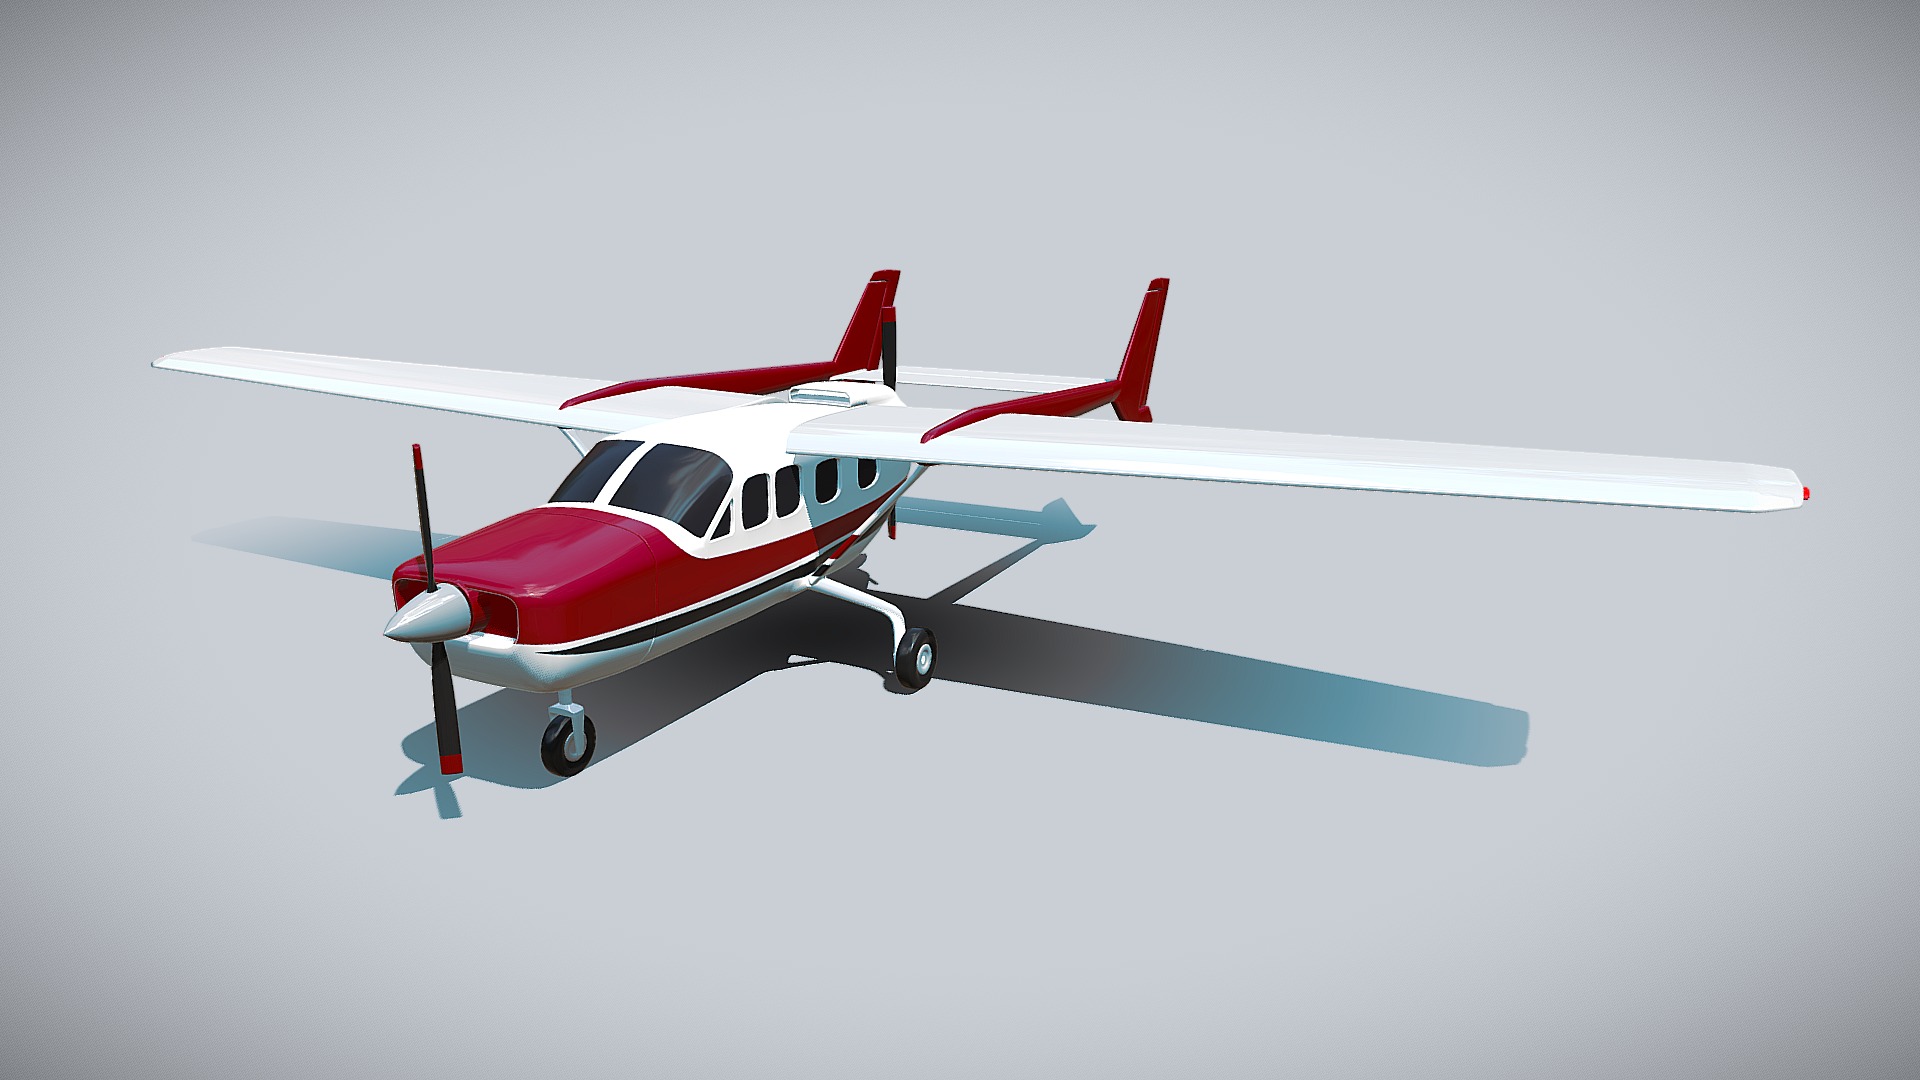 3D model Cessna Skymaster 337 airplane - This is a 3D model of the Cessna Skymaster 337 airplane. The 3D model is about a small airplane flying in the sky.